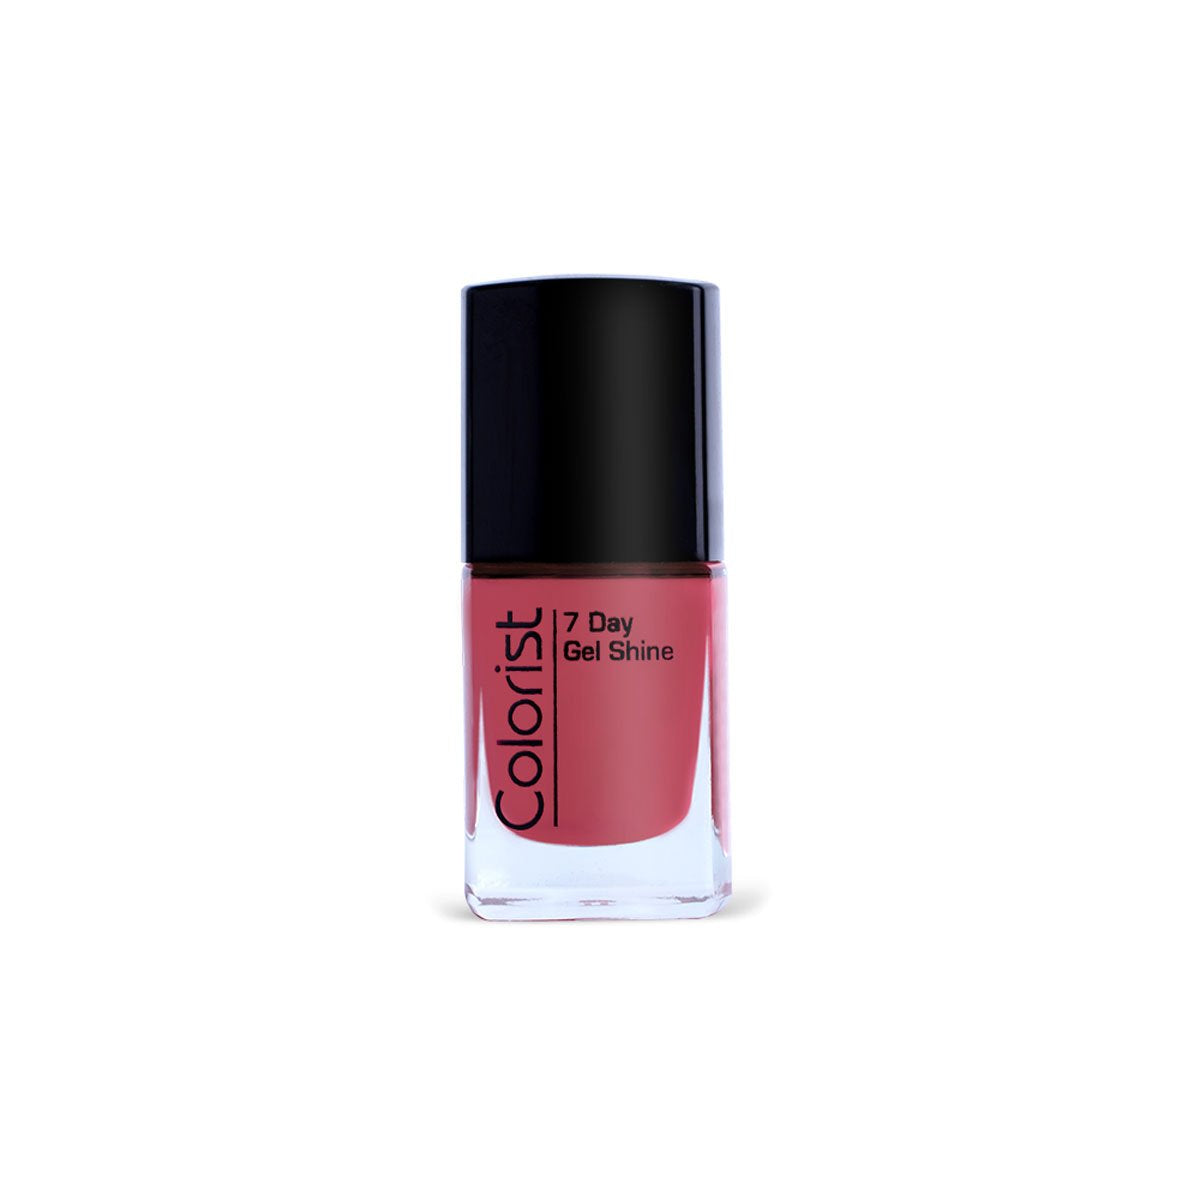 Buy  ST London - Colorist Nail Paint - ST019 - Blush - at Best Price Online in Pakistan